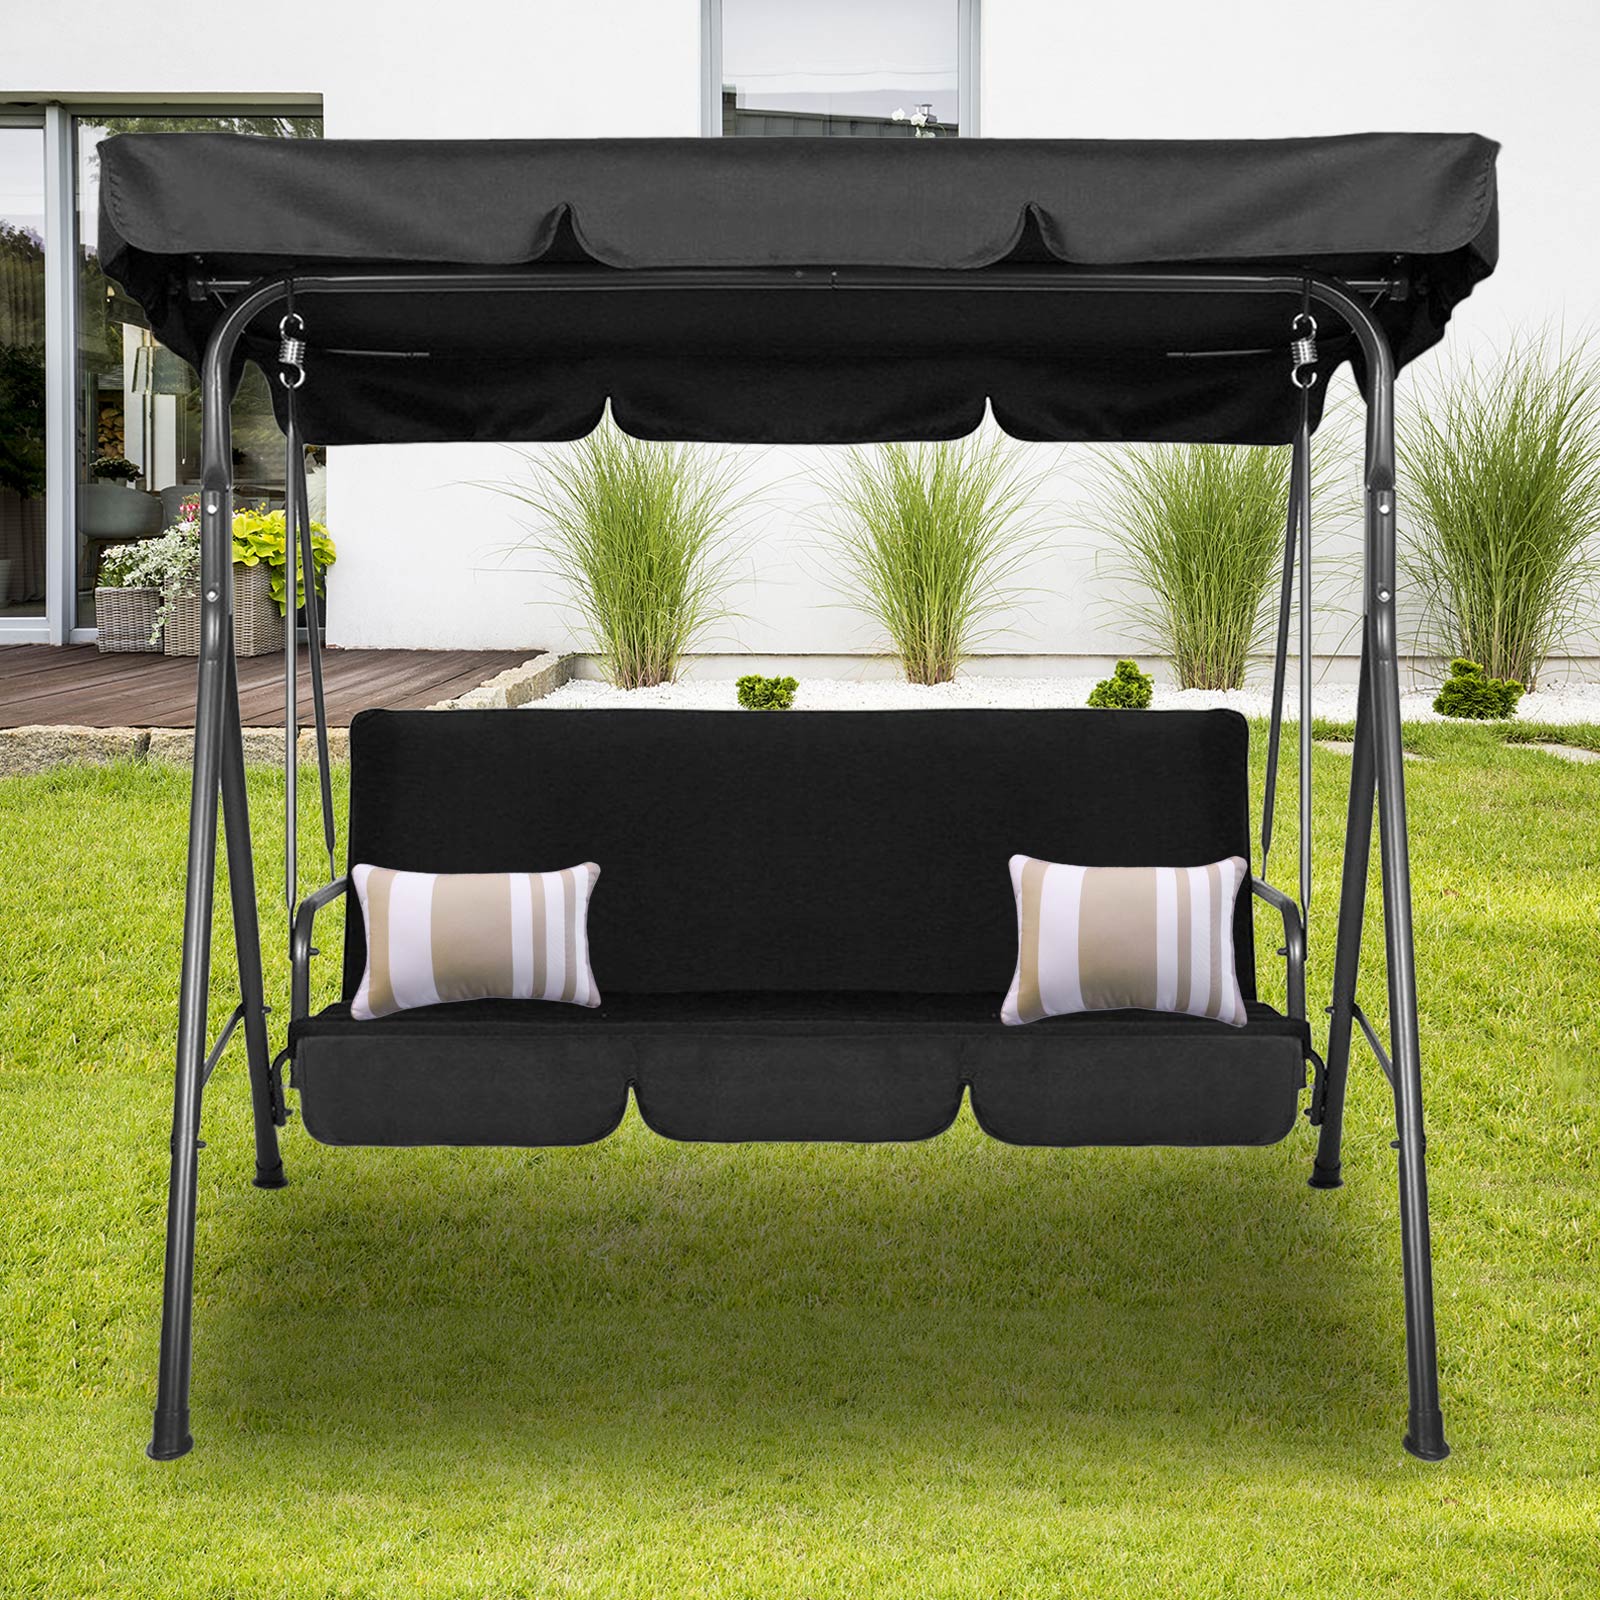 Milano Outdoor Swing Bench Seat Chair Canopy Furniture 3 Seater Garden Hammock - Black - image2